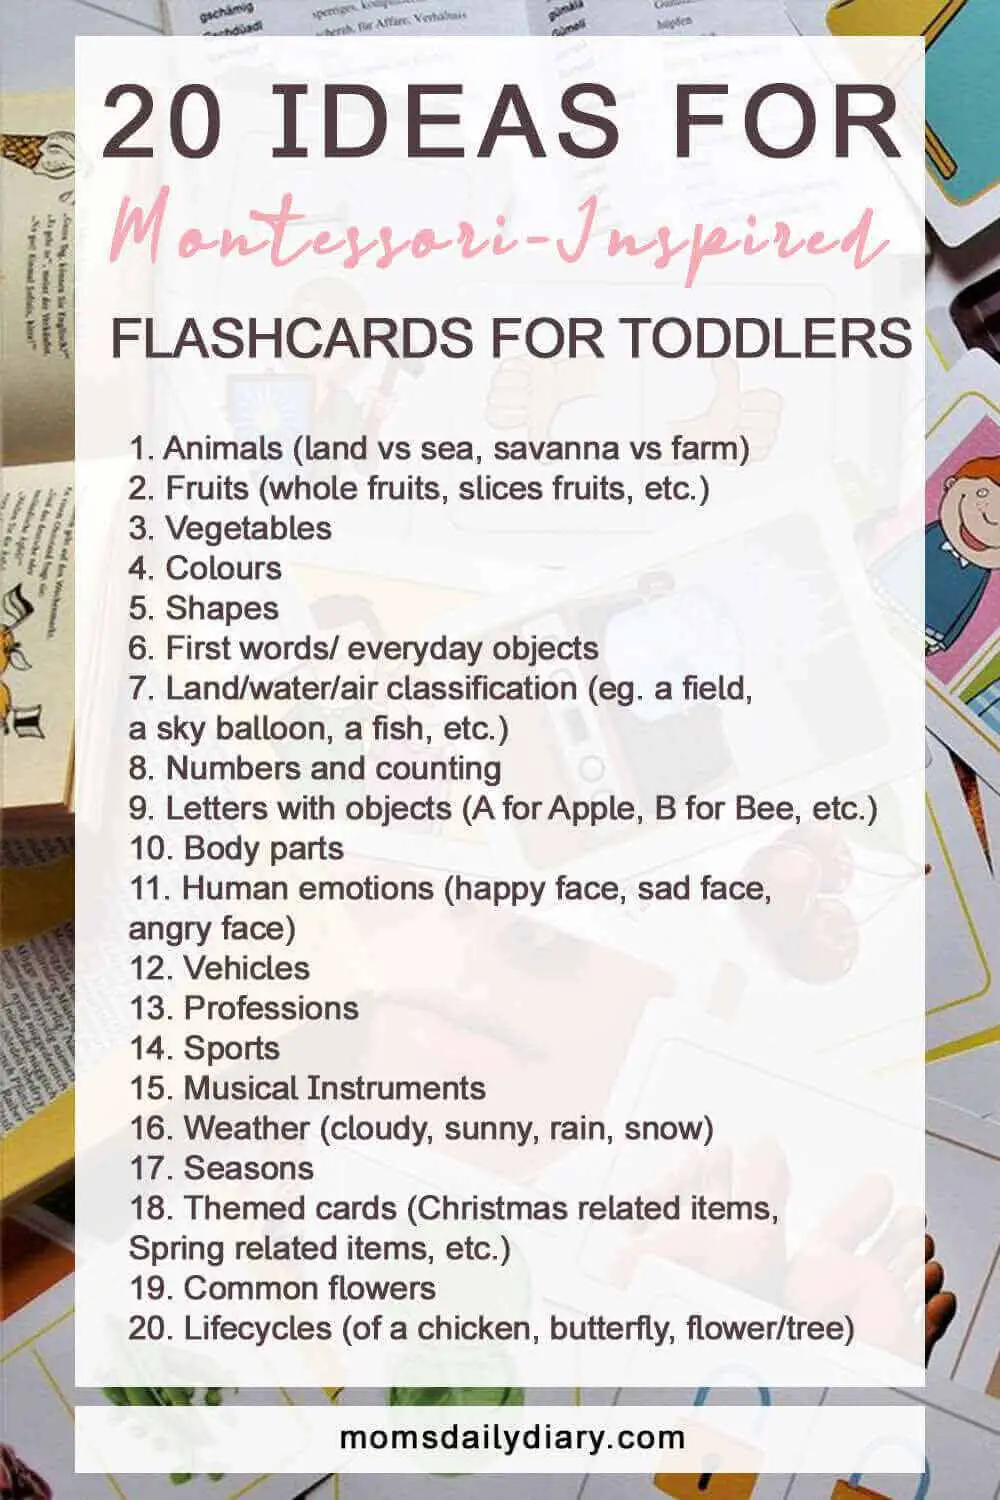 Looking for alternative toddler fun? Check out these 20 ideas for Montessori flashcards you can create at home.